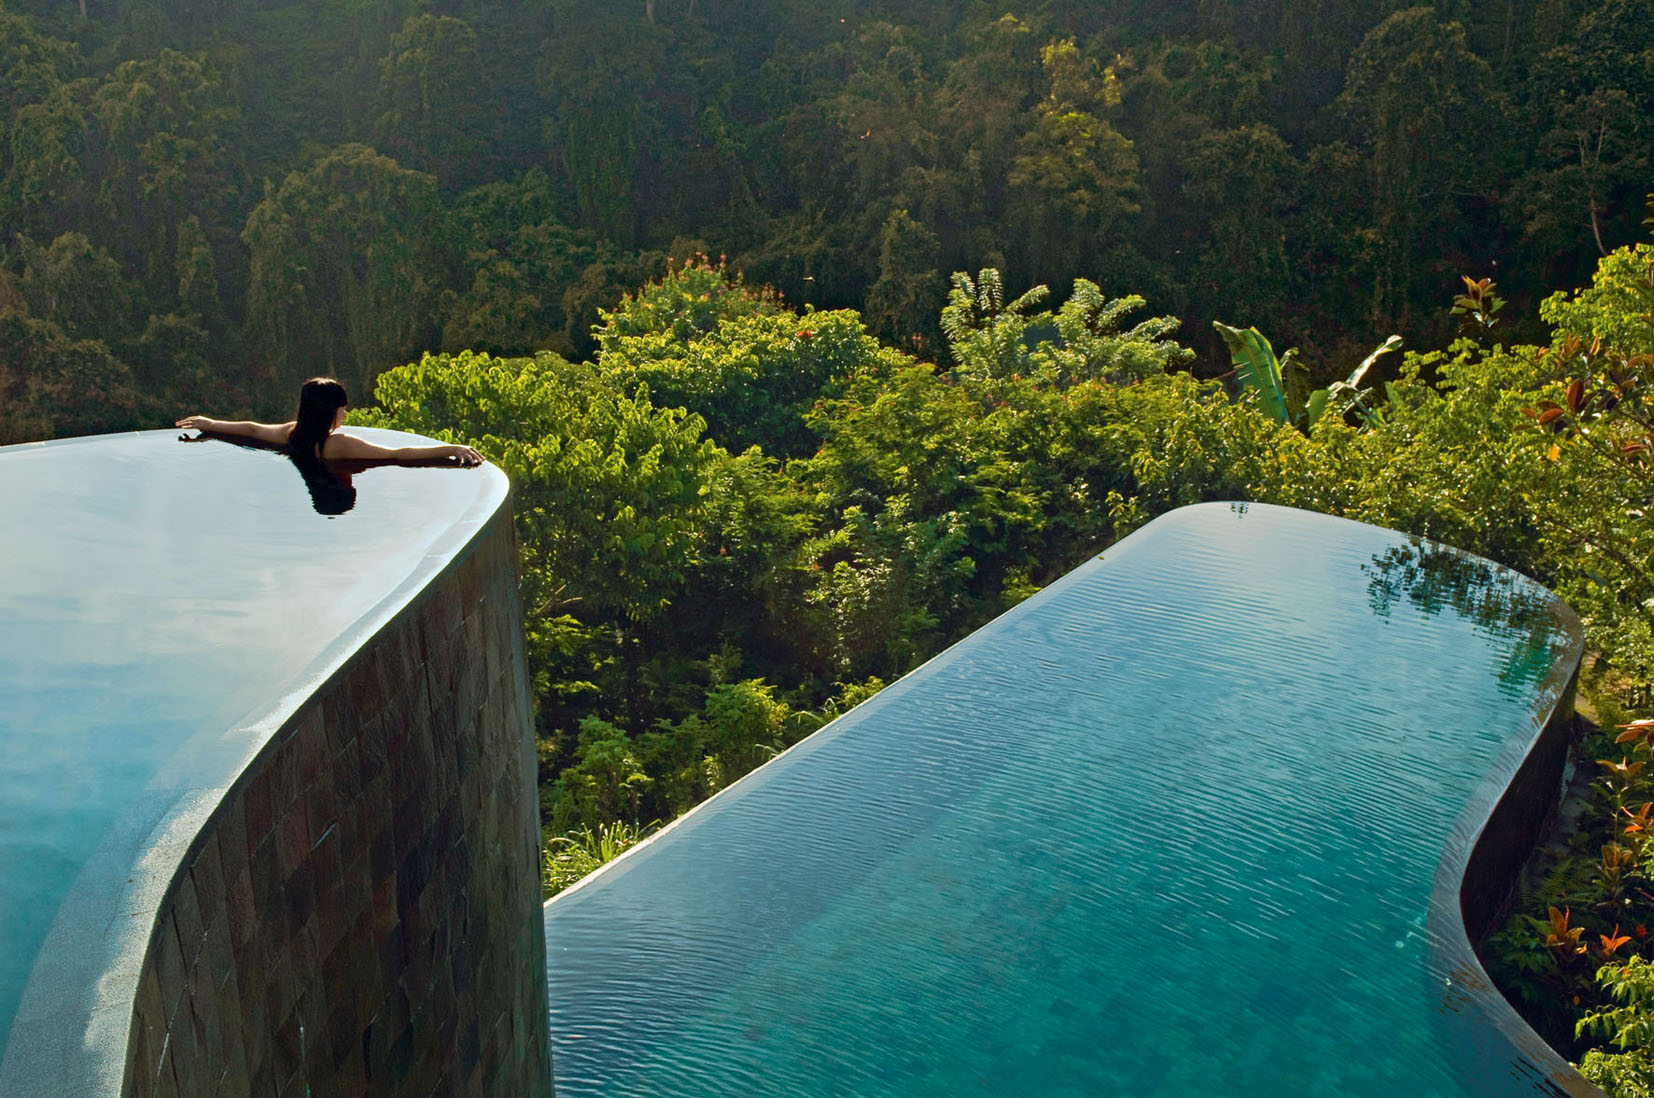 From the pool, you have an incredible view of the rainforest